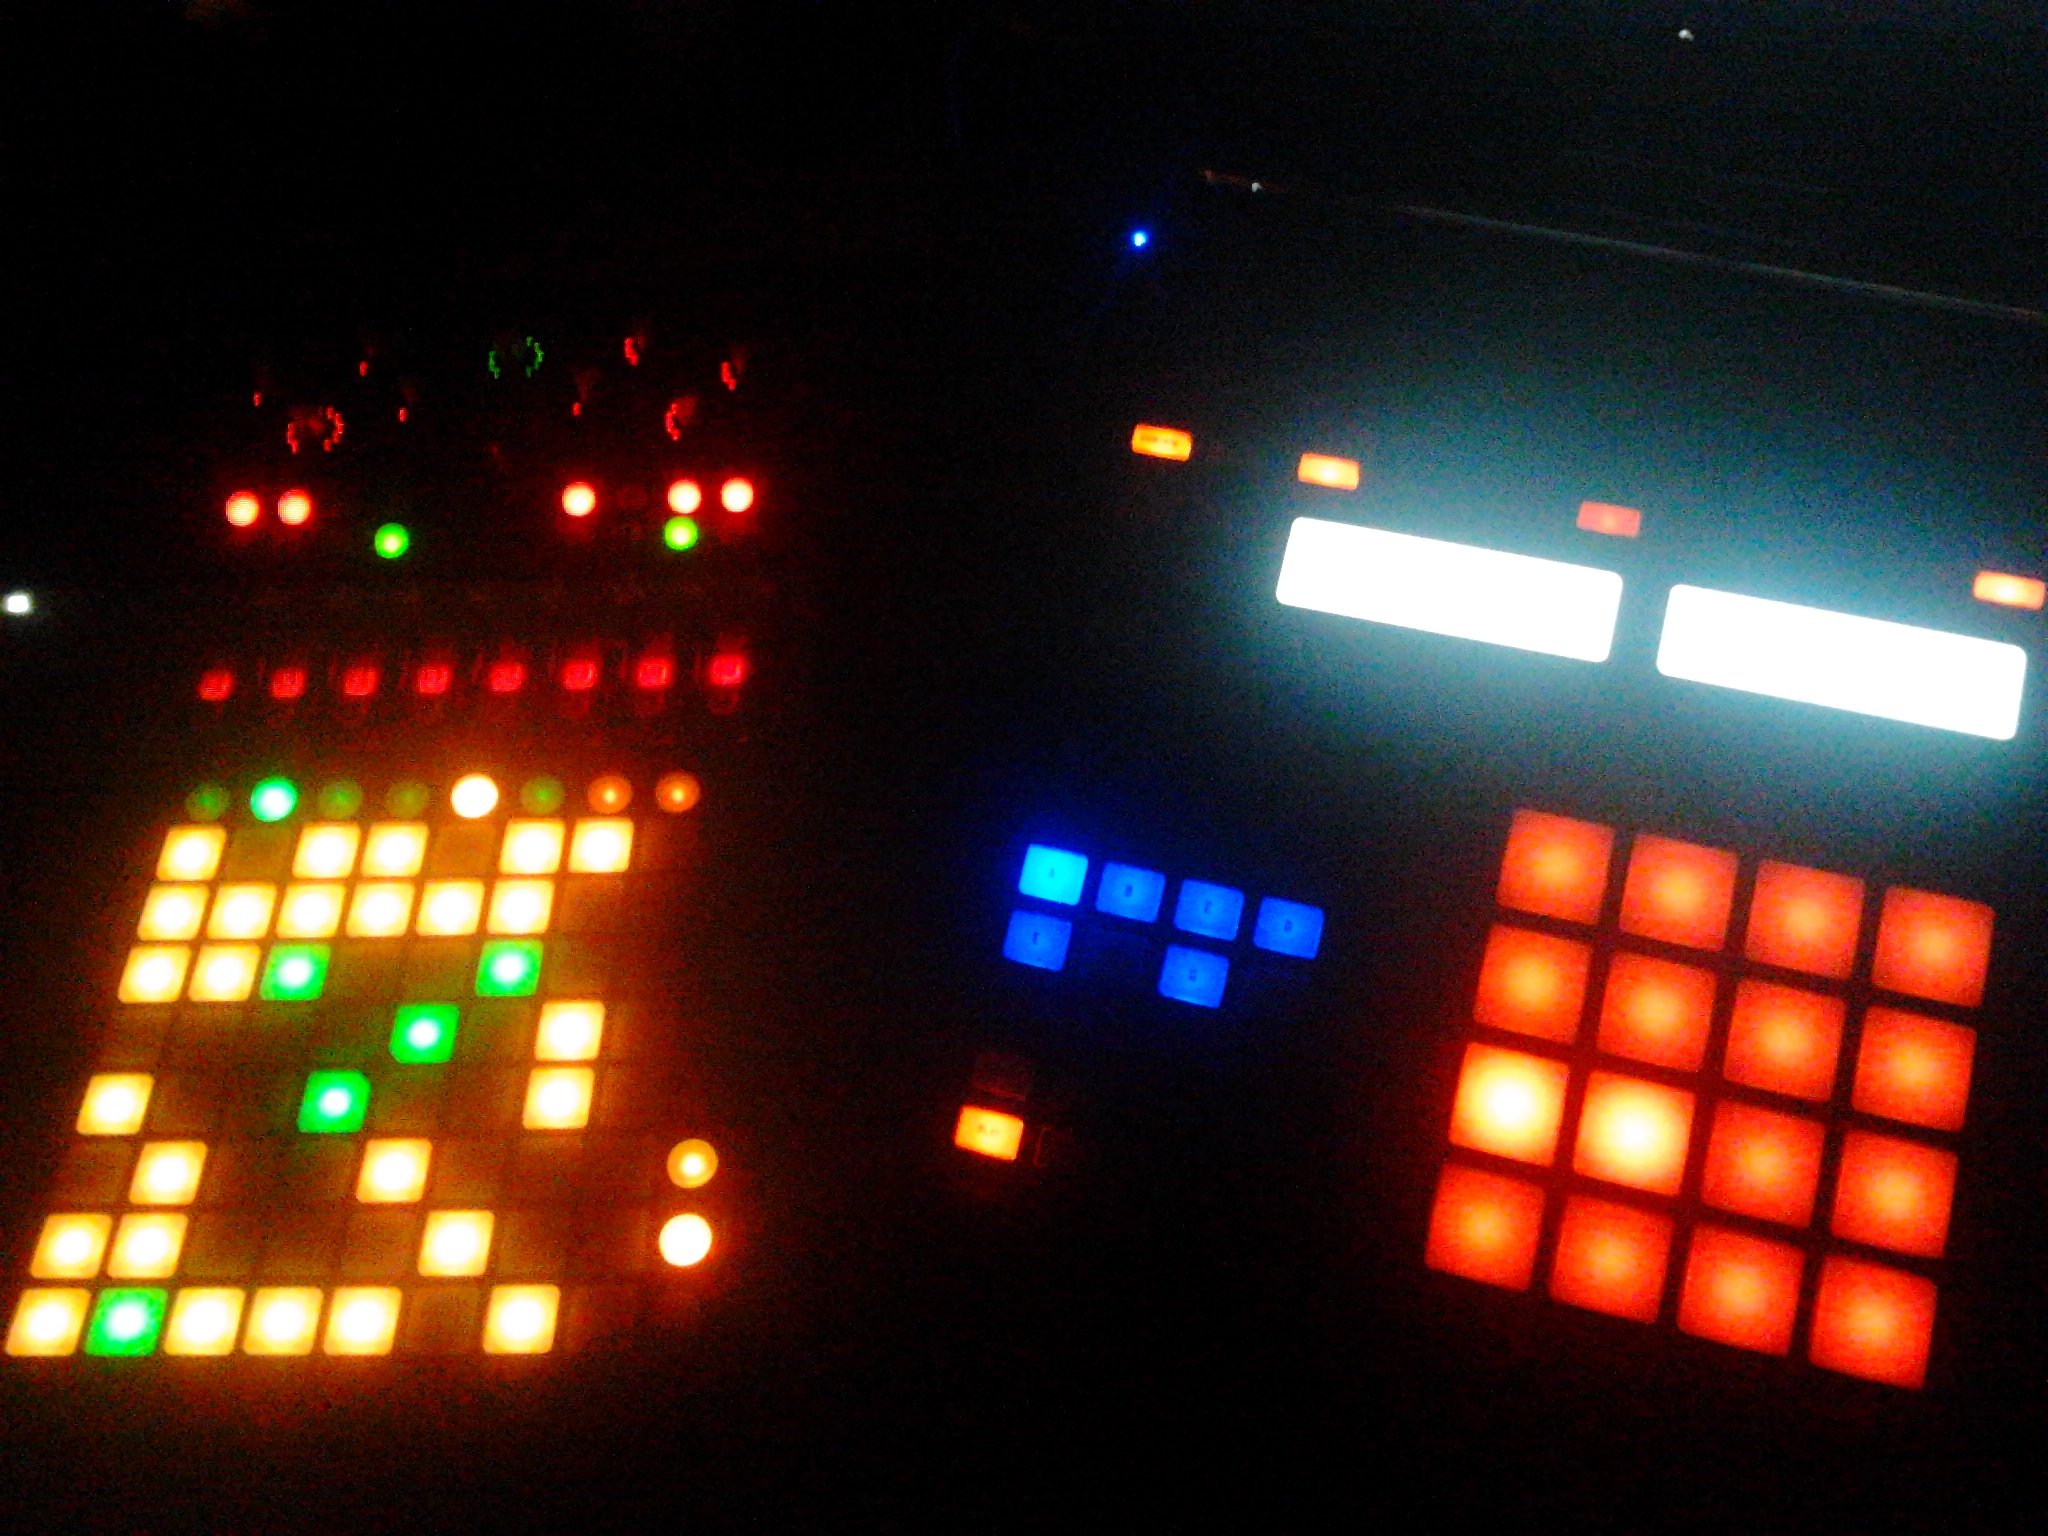 Gears Maschine Launchpad Nocturne